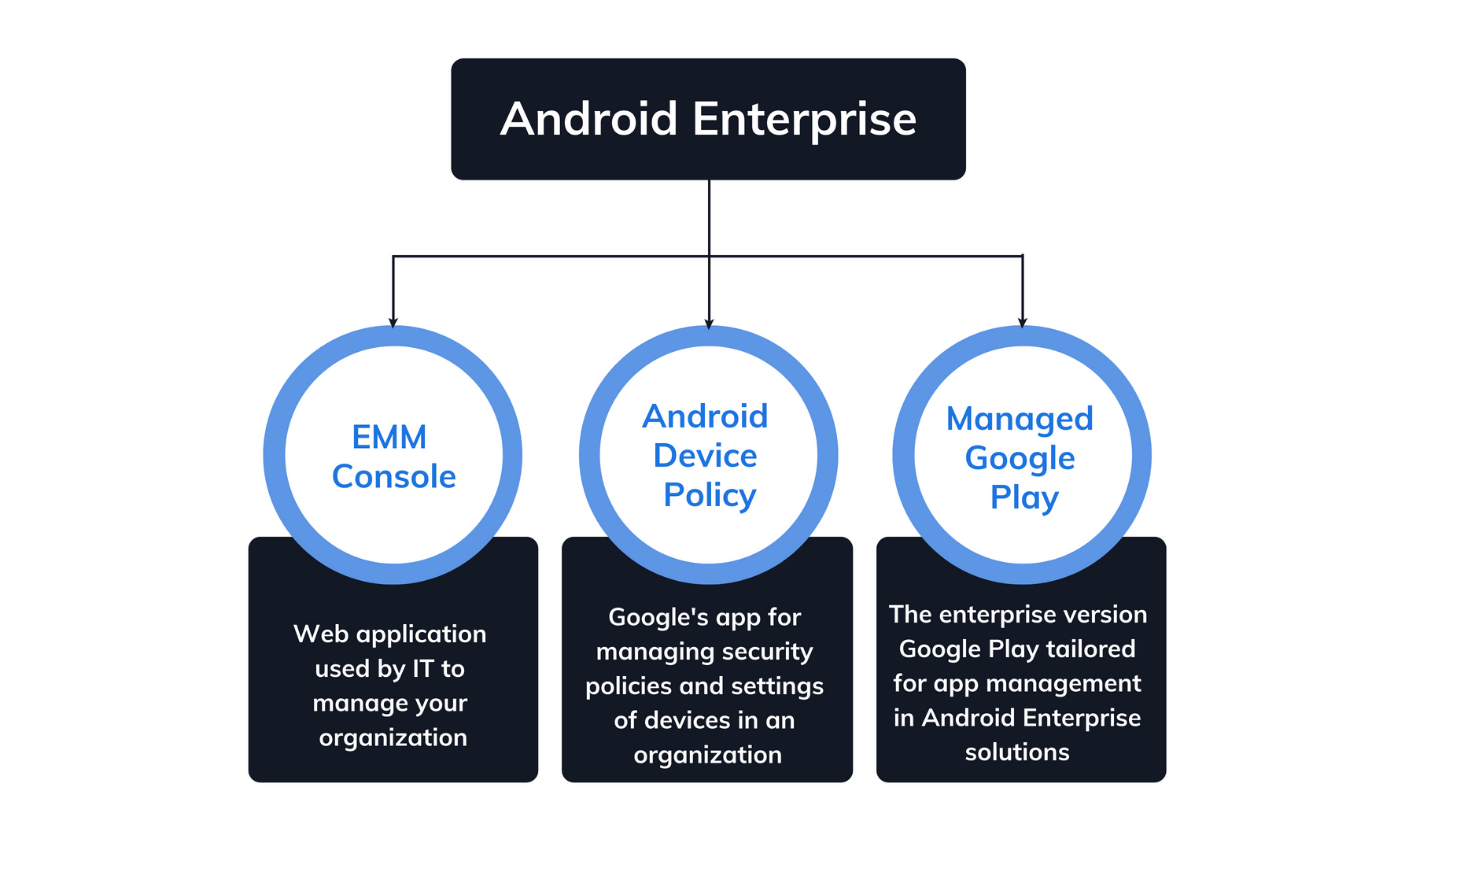 Components of Android Enterprise solution